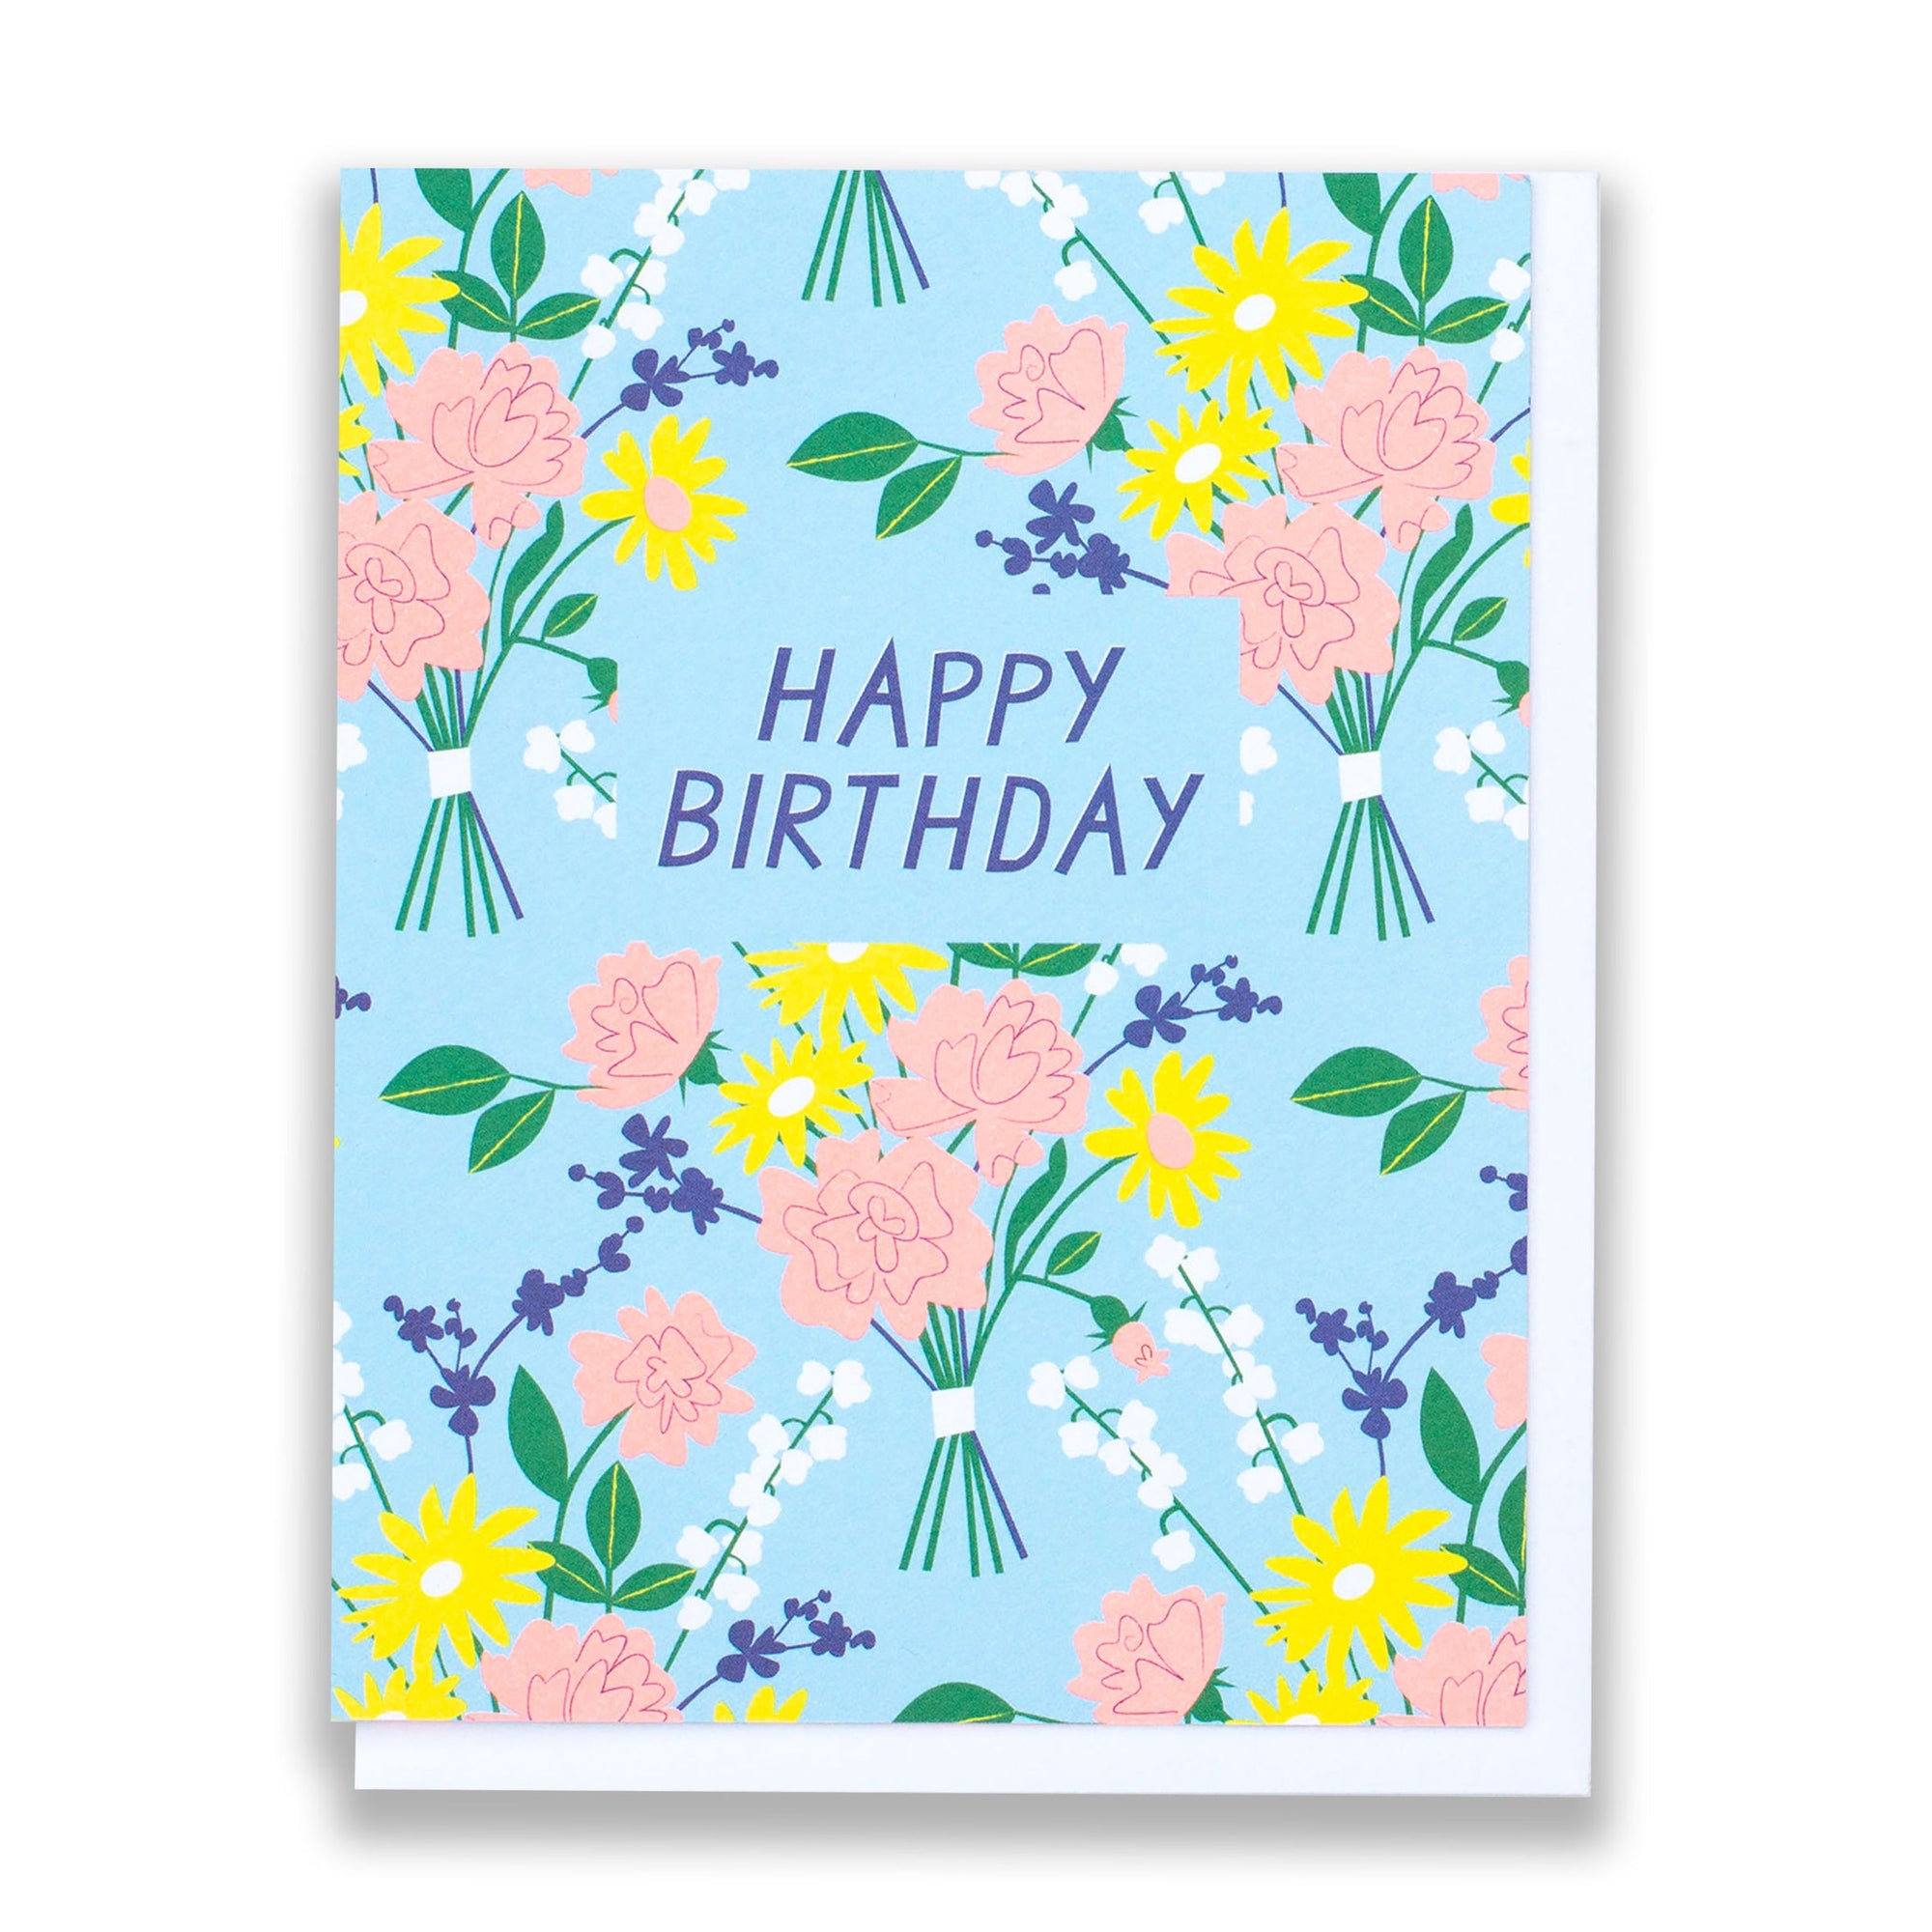 Blue and Yellow Vintage Floral Birthday Card